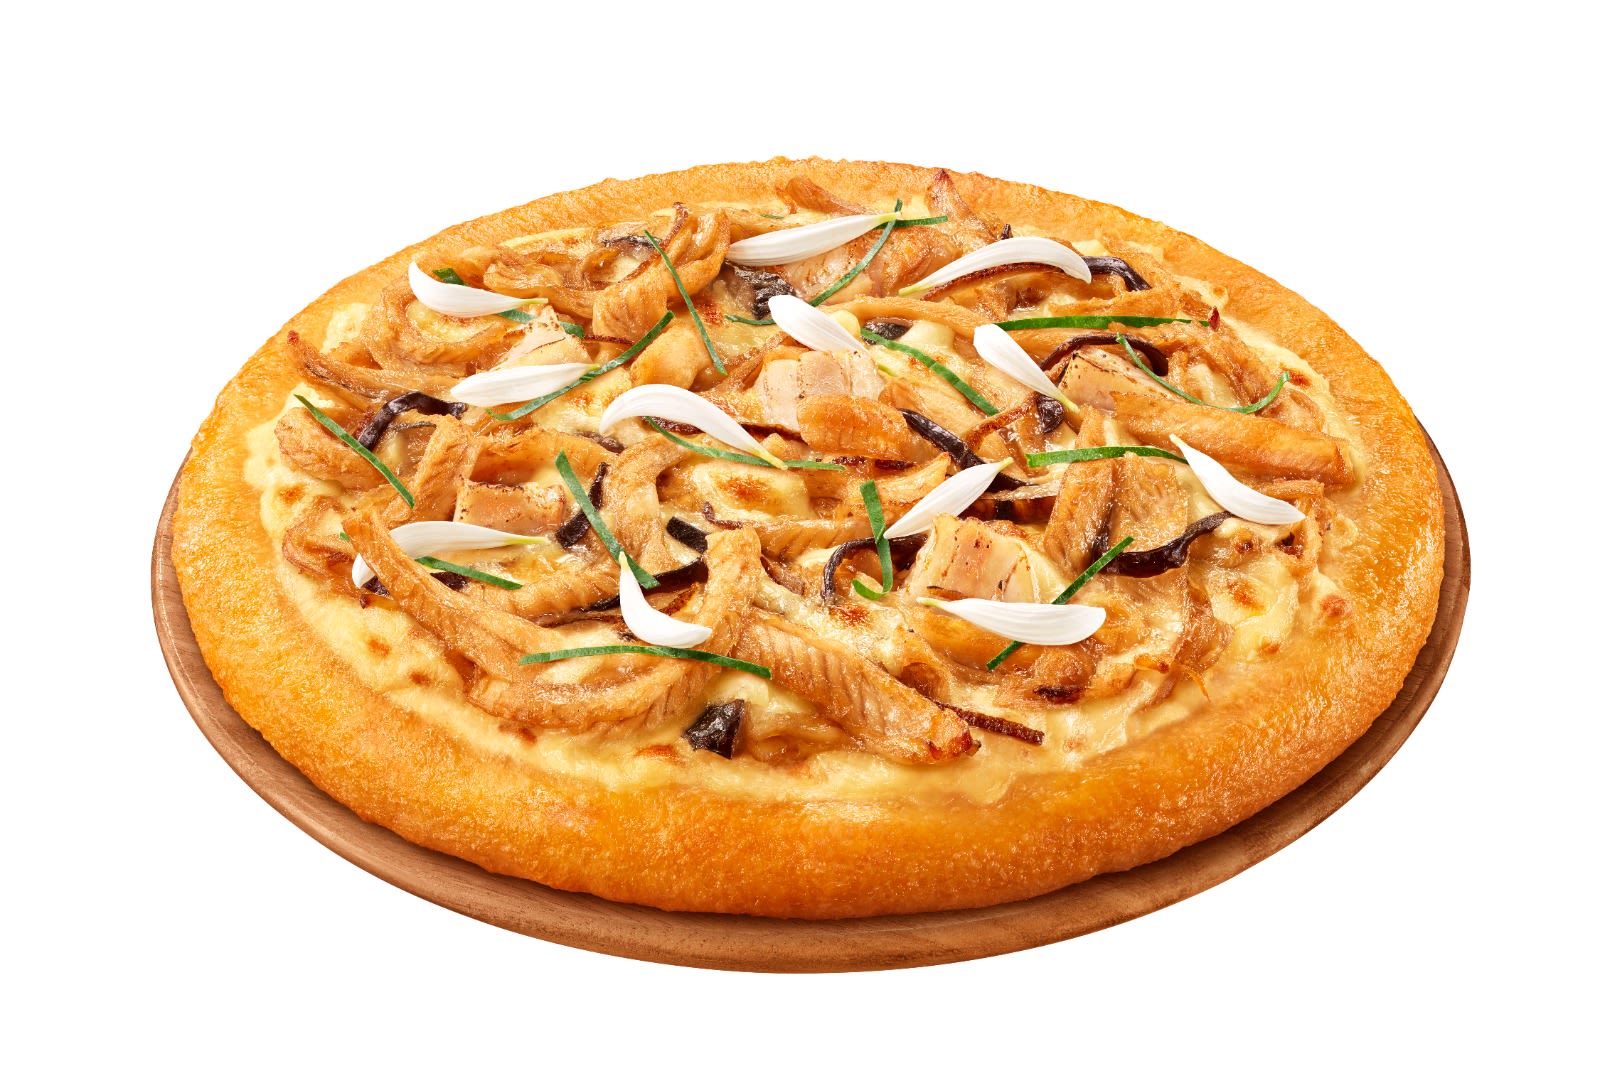 Snake Pizza Is Available In This Country, Do You Want To Try It